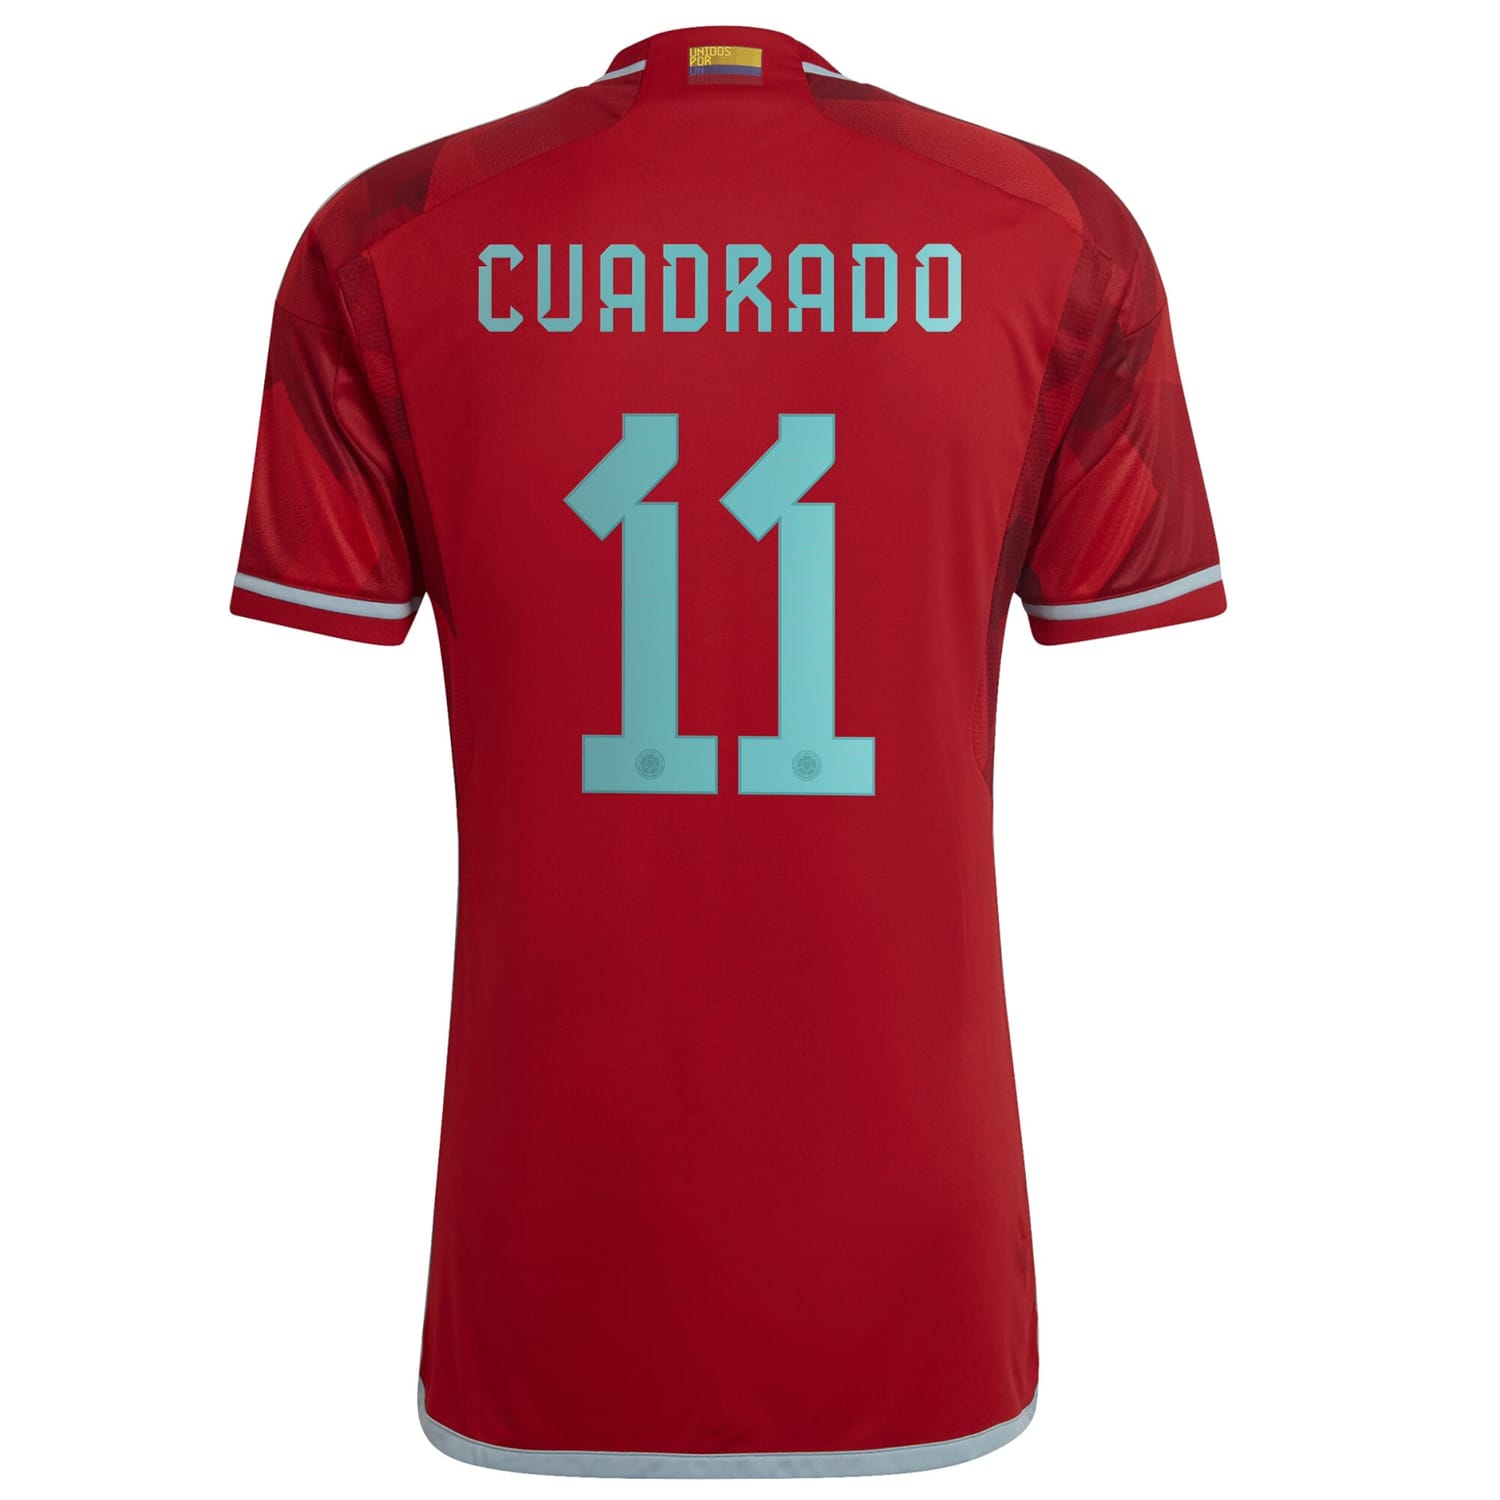 Colombia National Team Away Jersey Shirt Red 2022-23 player Juan Cuadrado printing for Men